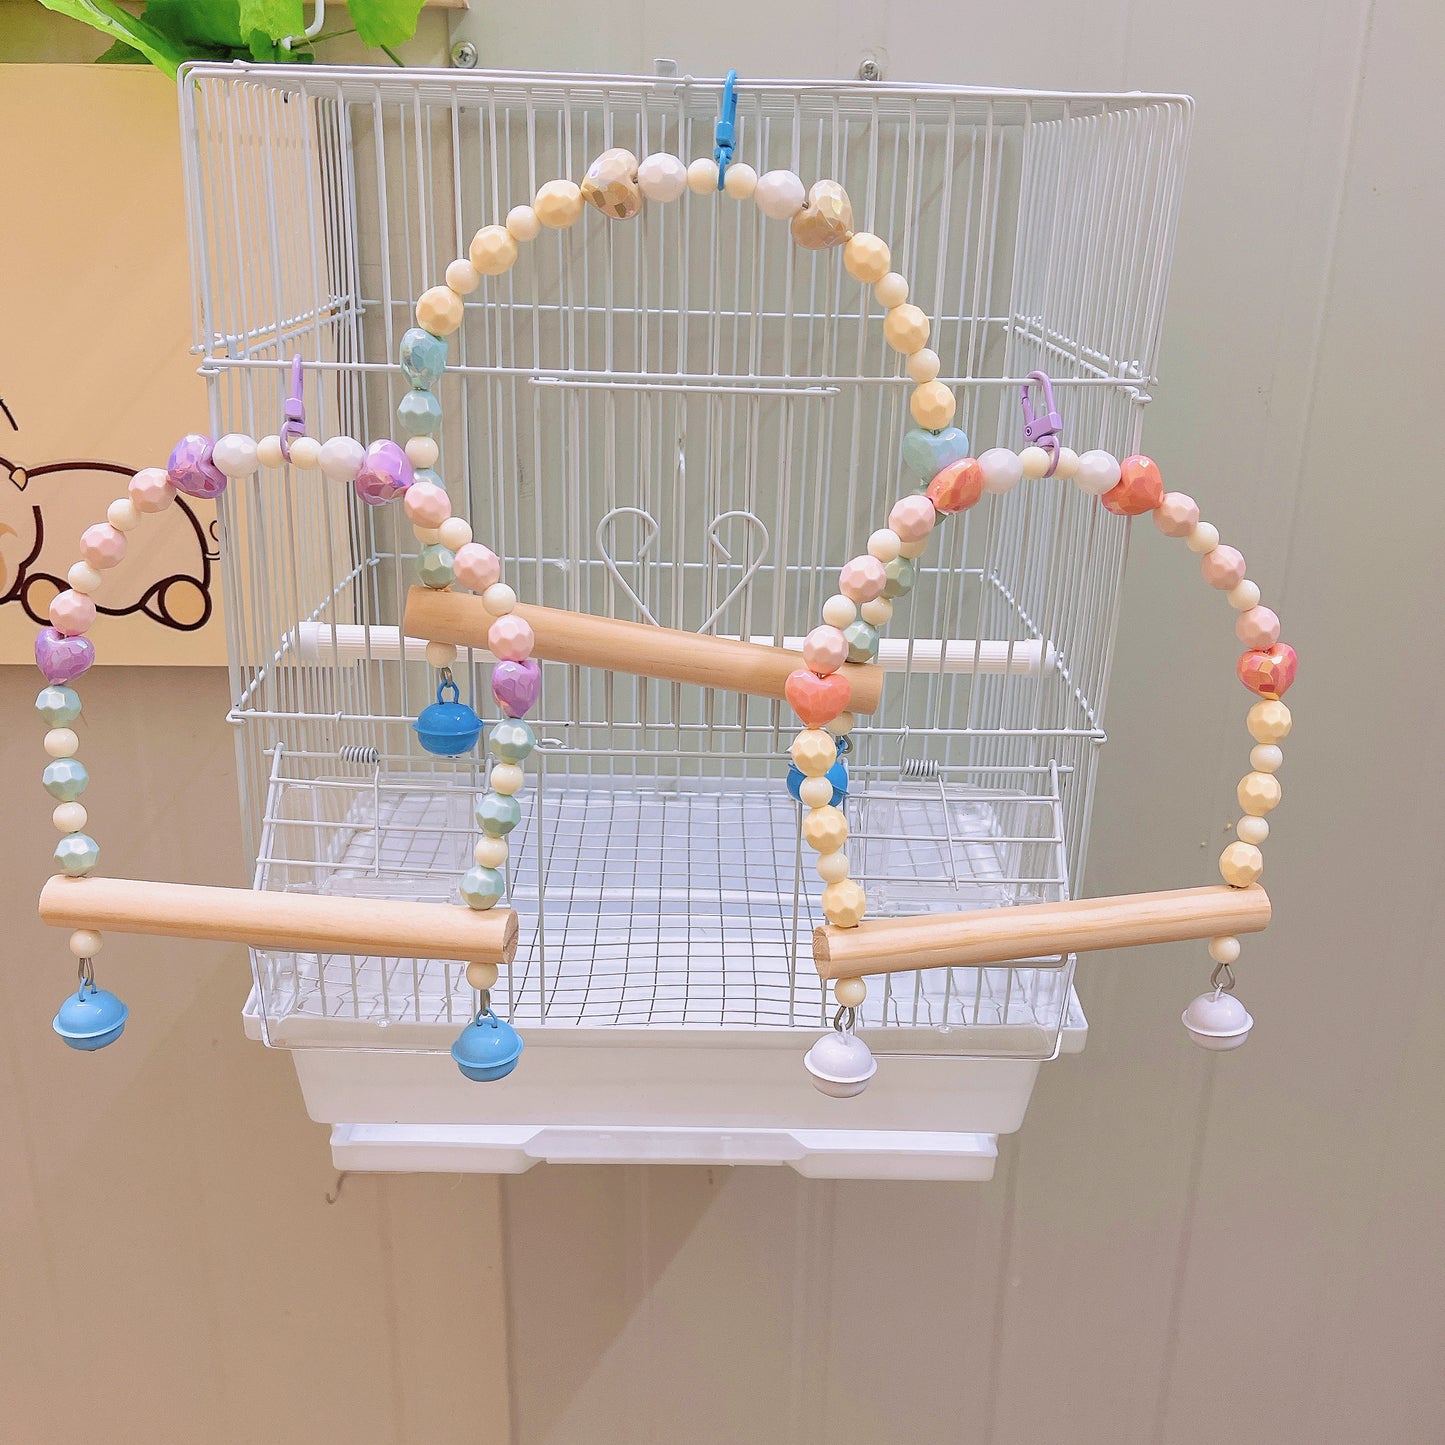 Handcrafted Beaded Semi-Circle Top Colorful Bird Swing & Perch with Hook - Birdcage Accessory for Pet Bird Entertainment Parakeet Budgie Cockatiel Finch Lovebird Monk Parakeet Dove Parrotlet Sparrow